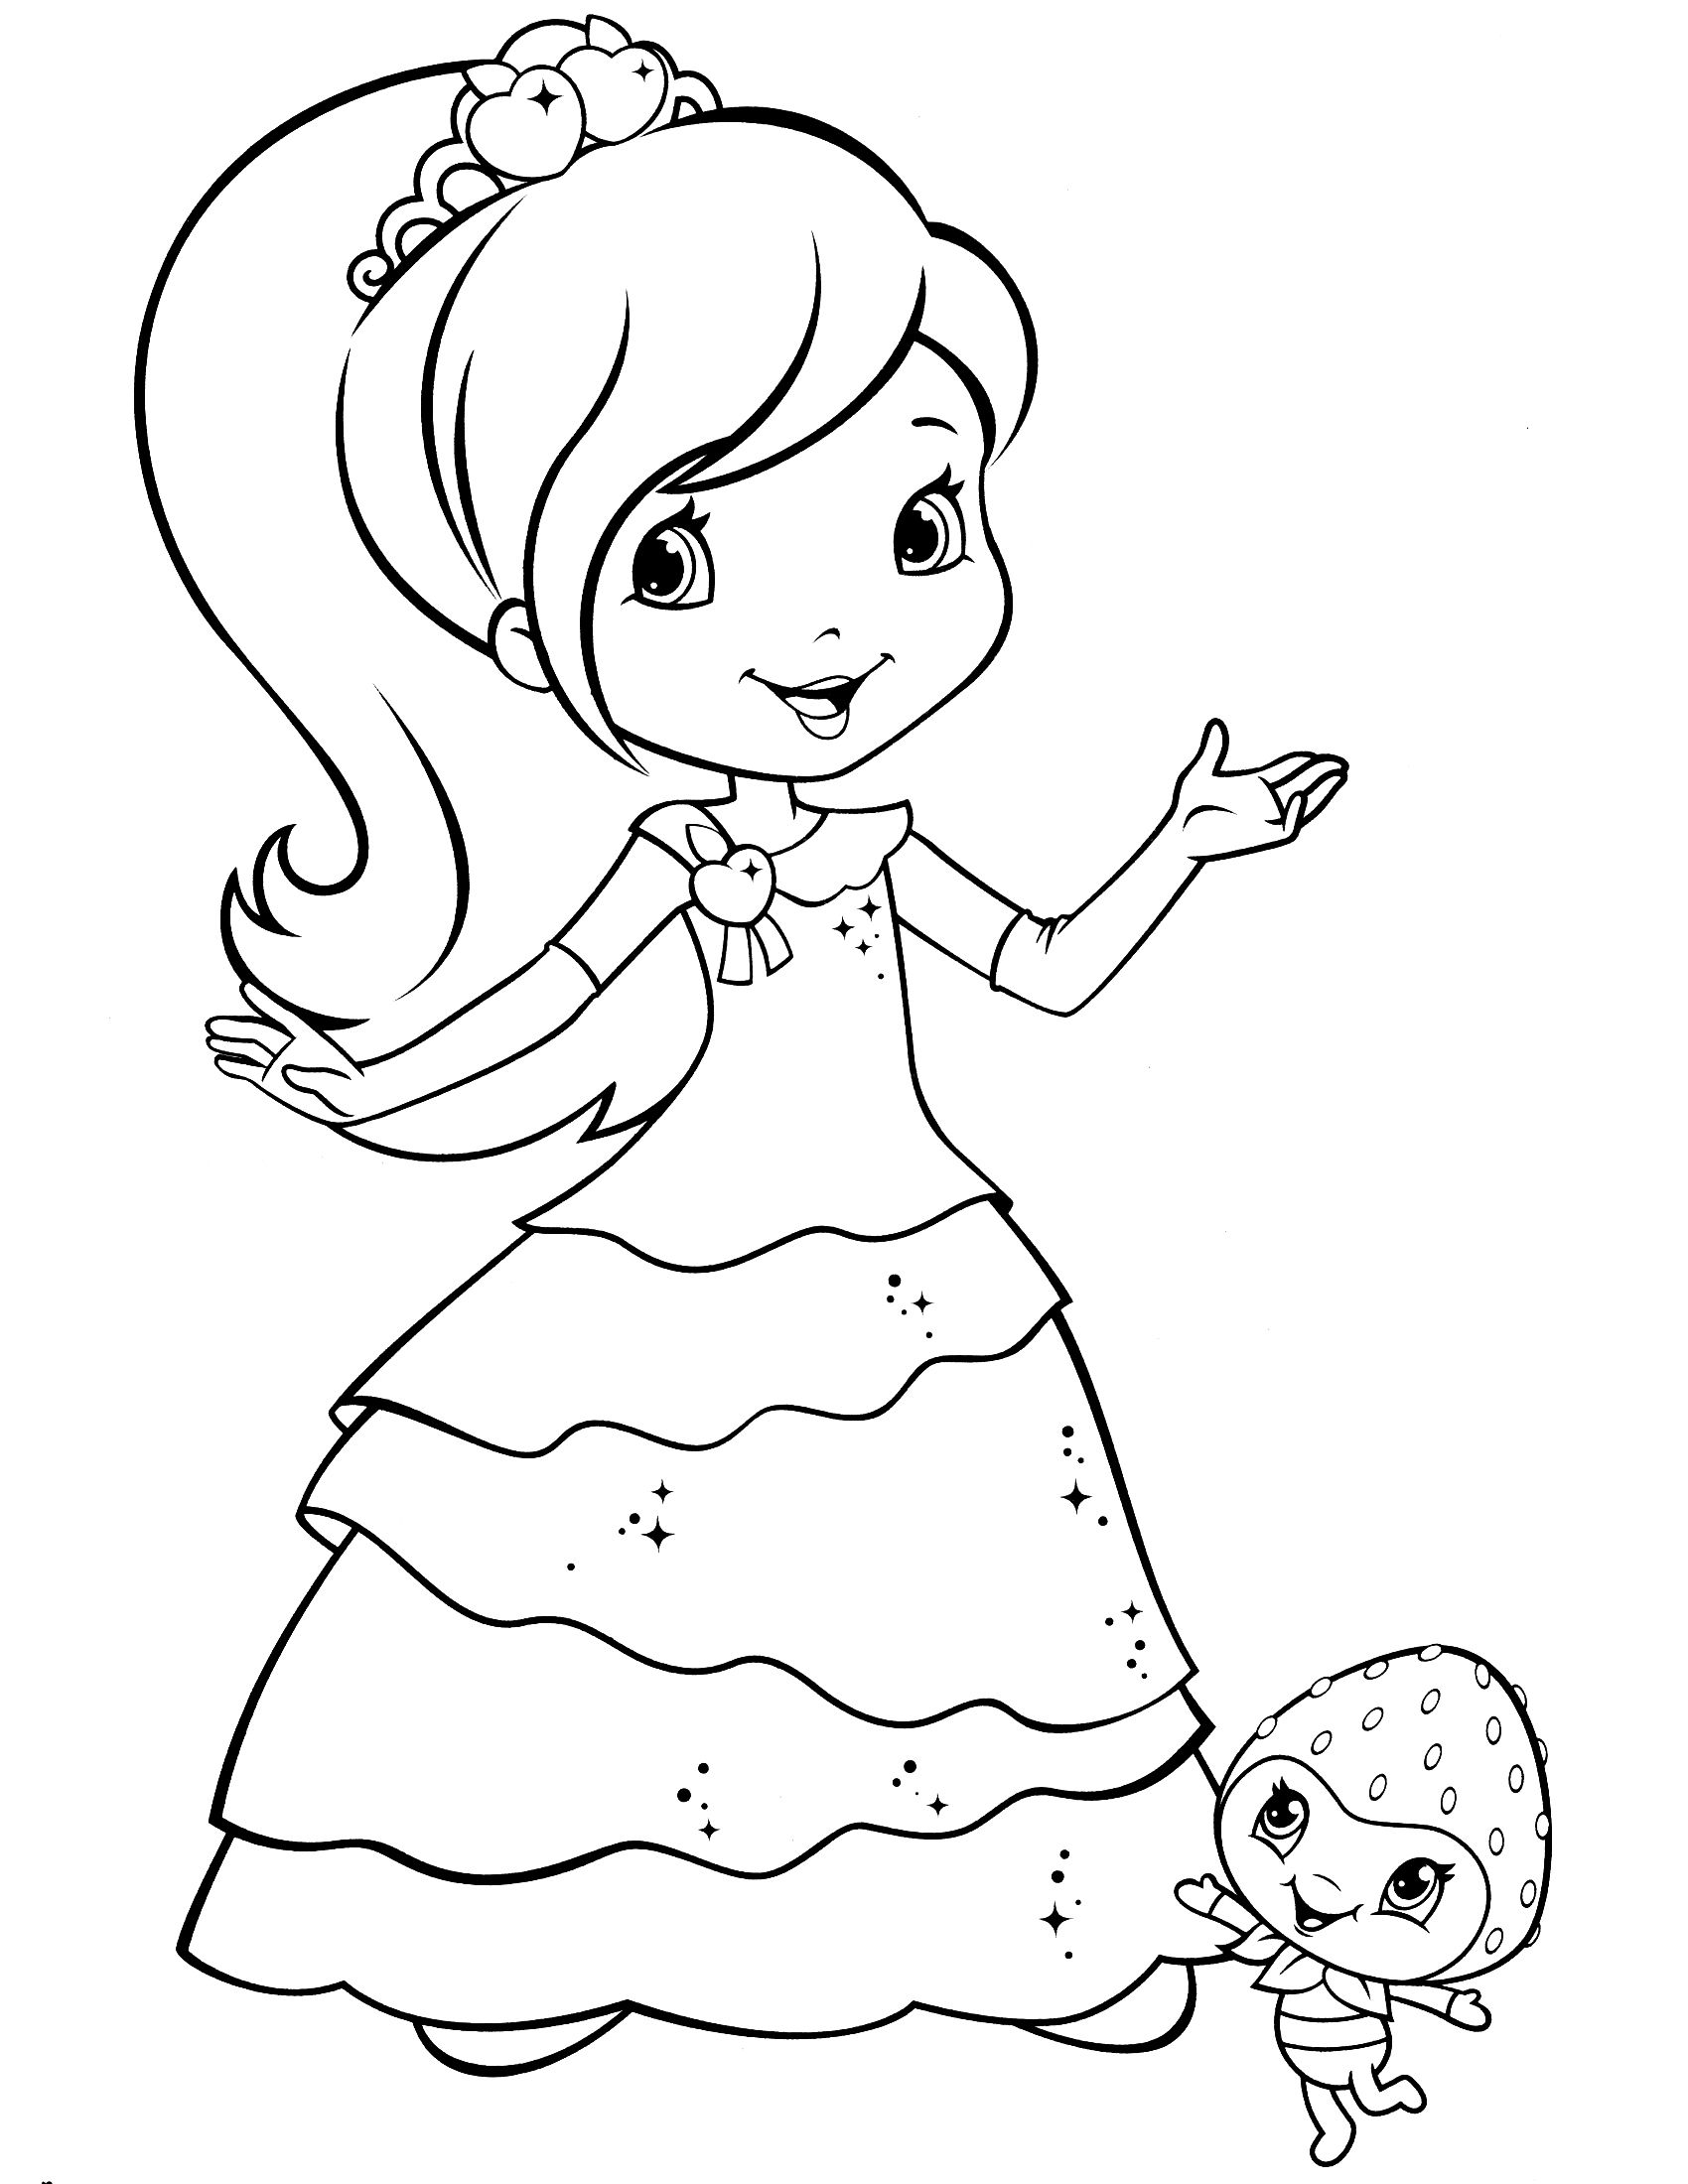 Printable Strawberry Shortcake Coloring Pages Pdf - Princess Strawberry Shortcake Coloring Pages